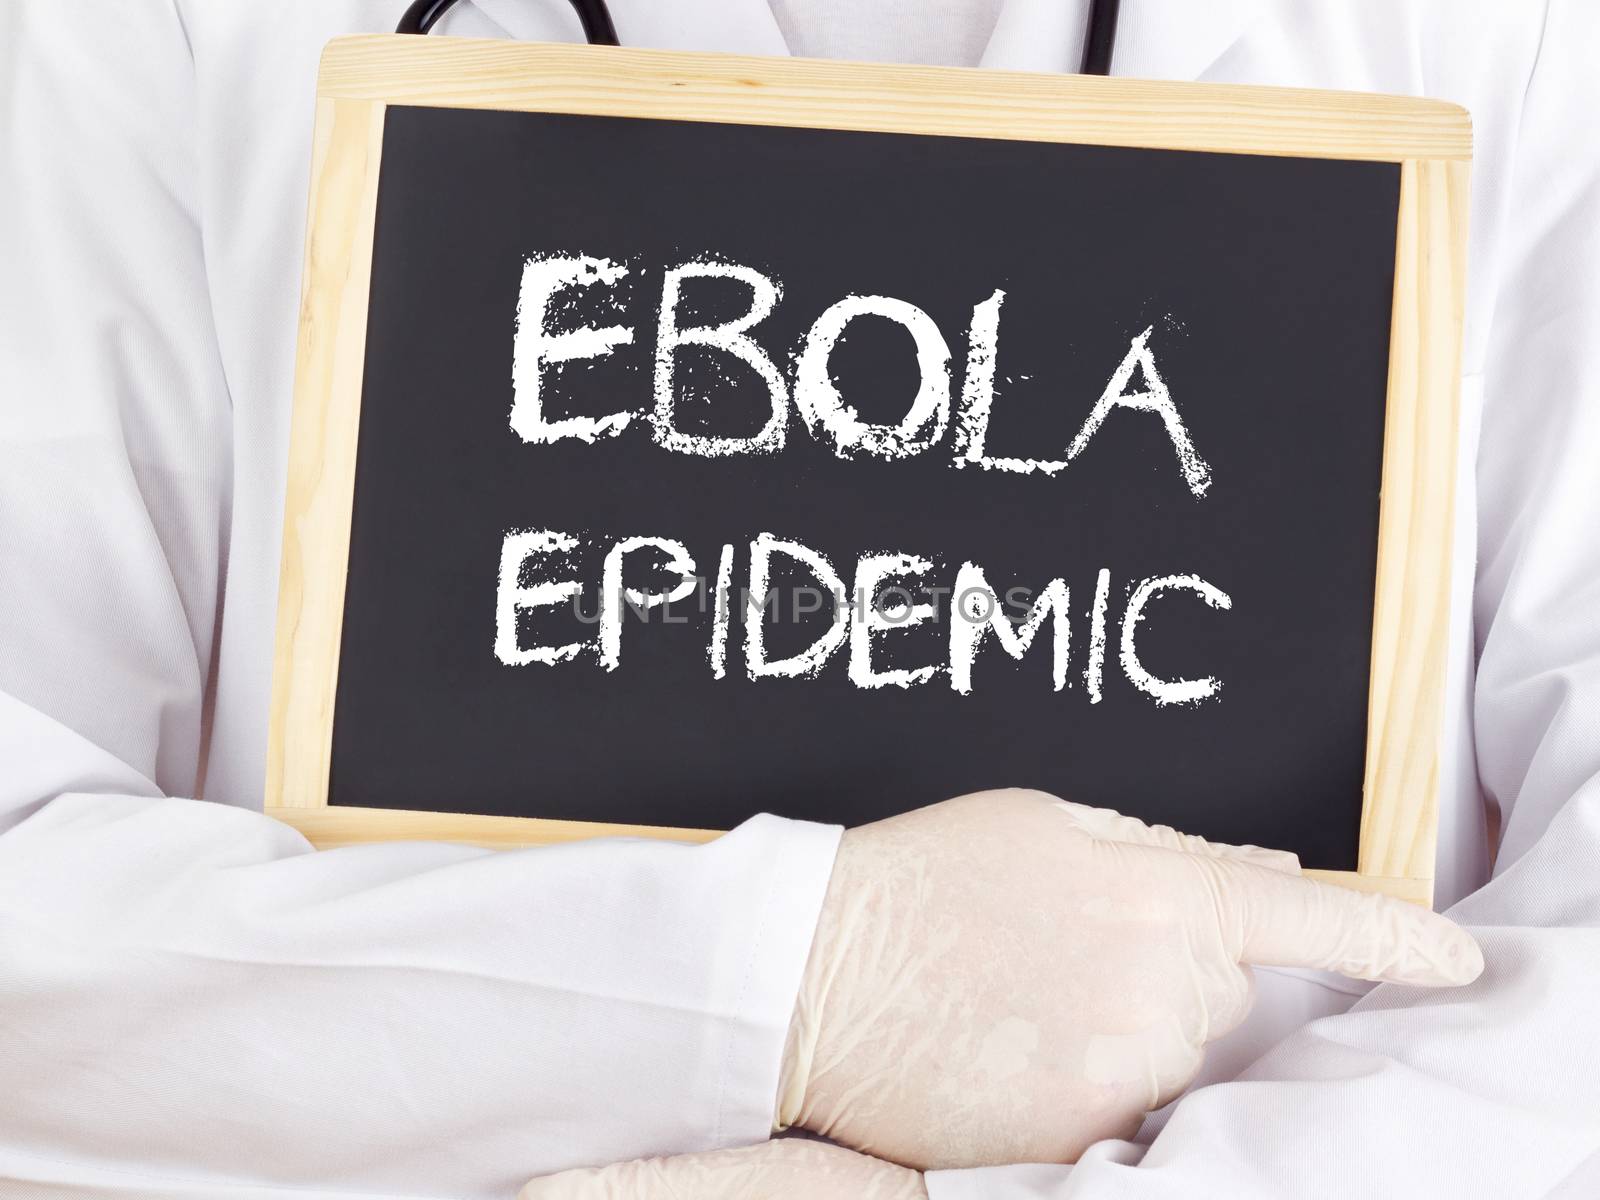 Doctor shows information: Ebola epidemic by gwolters